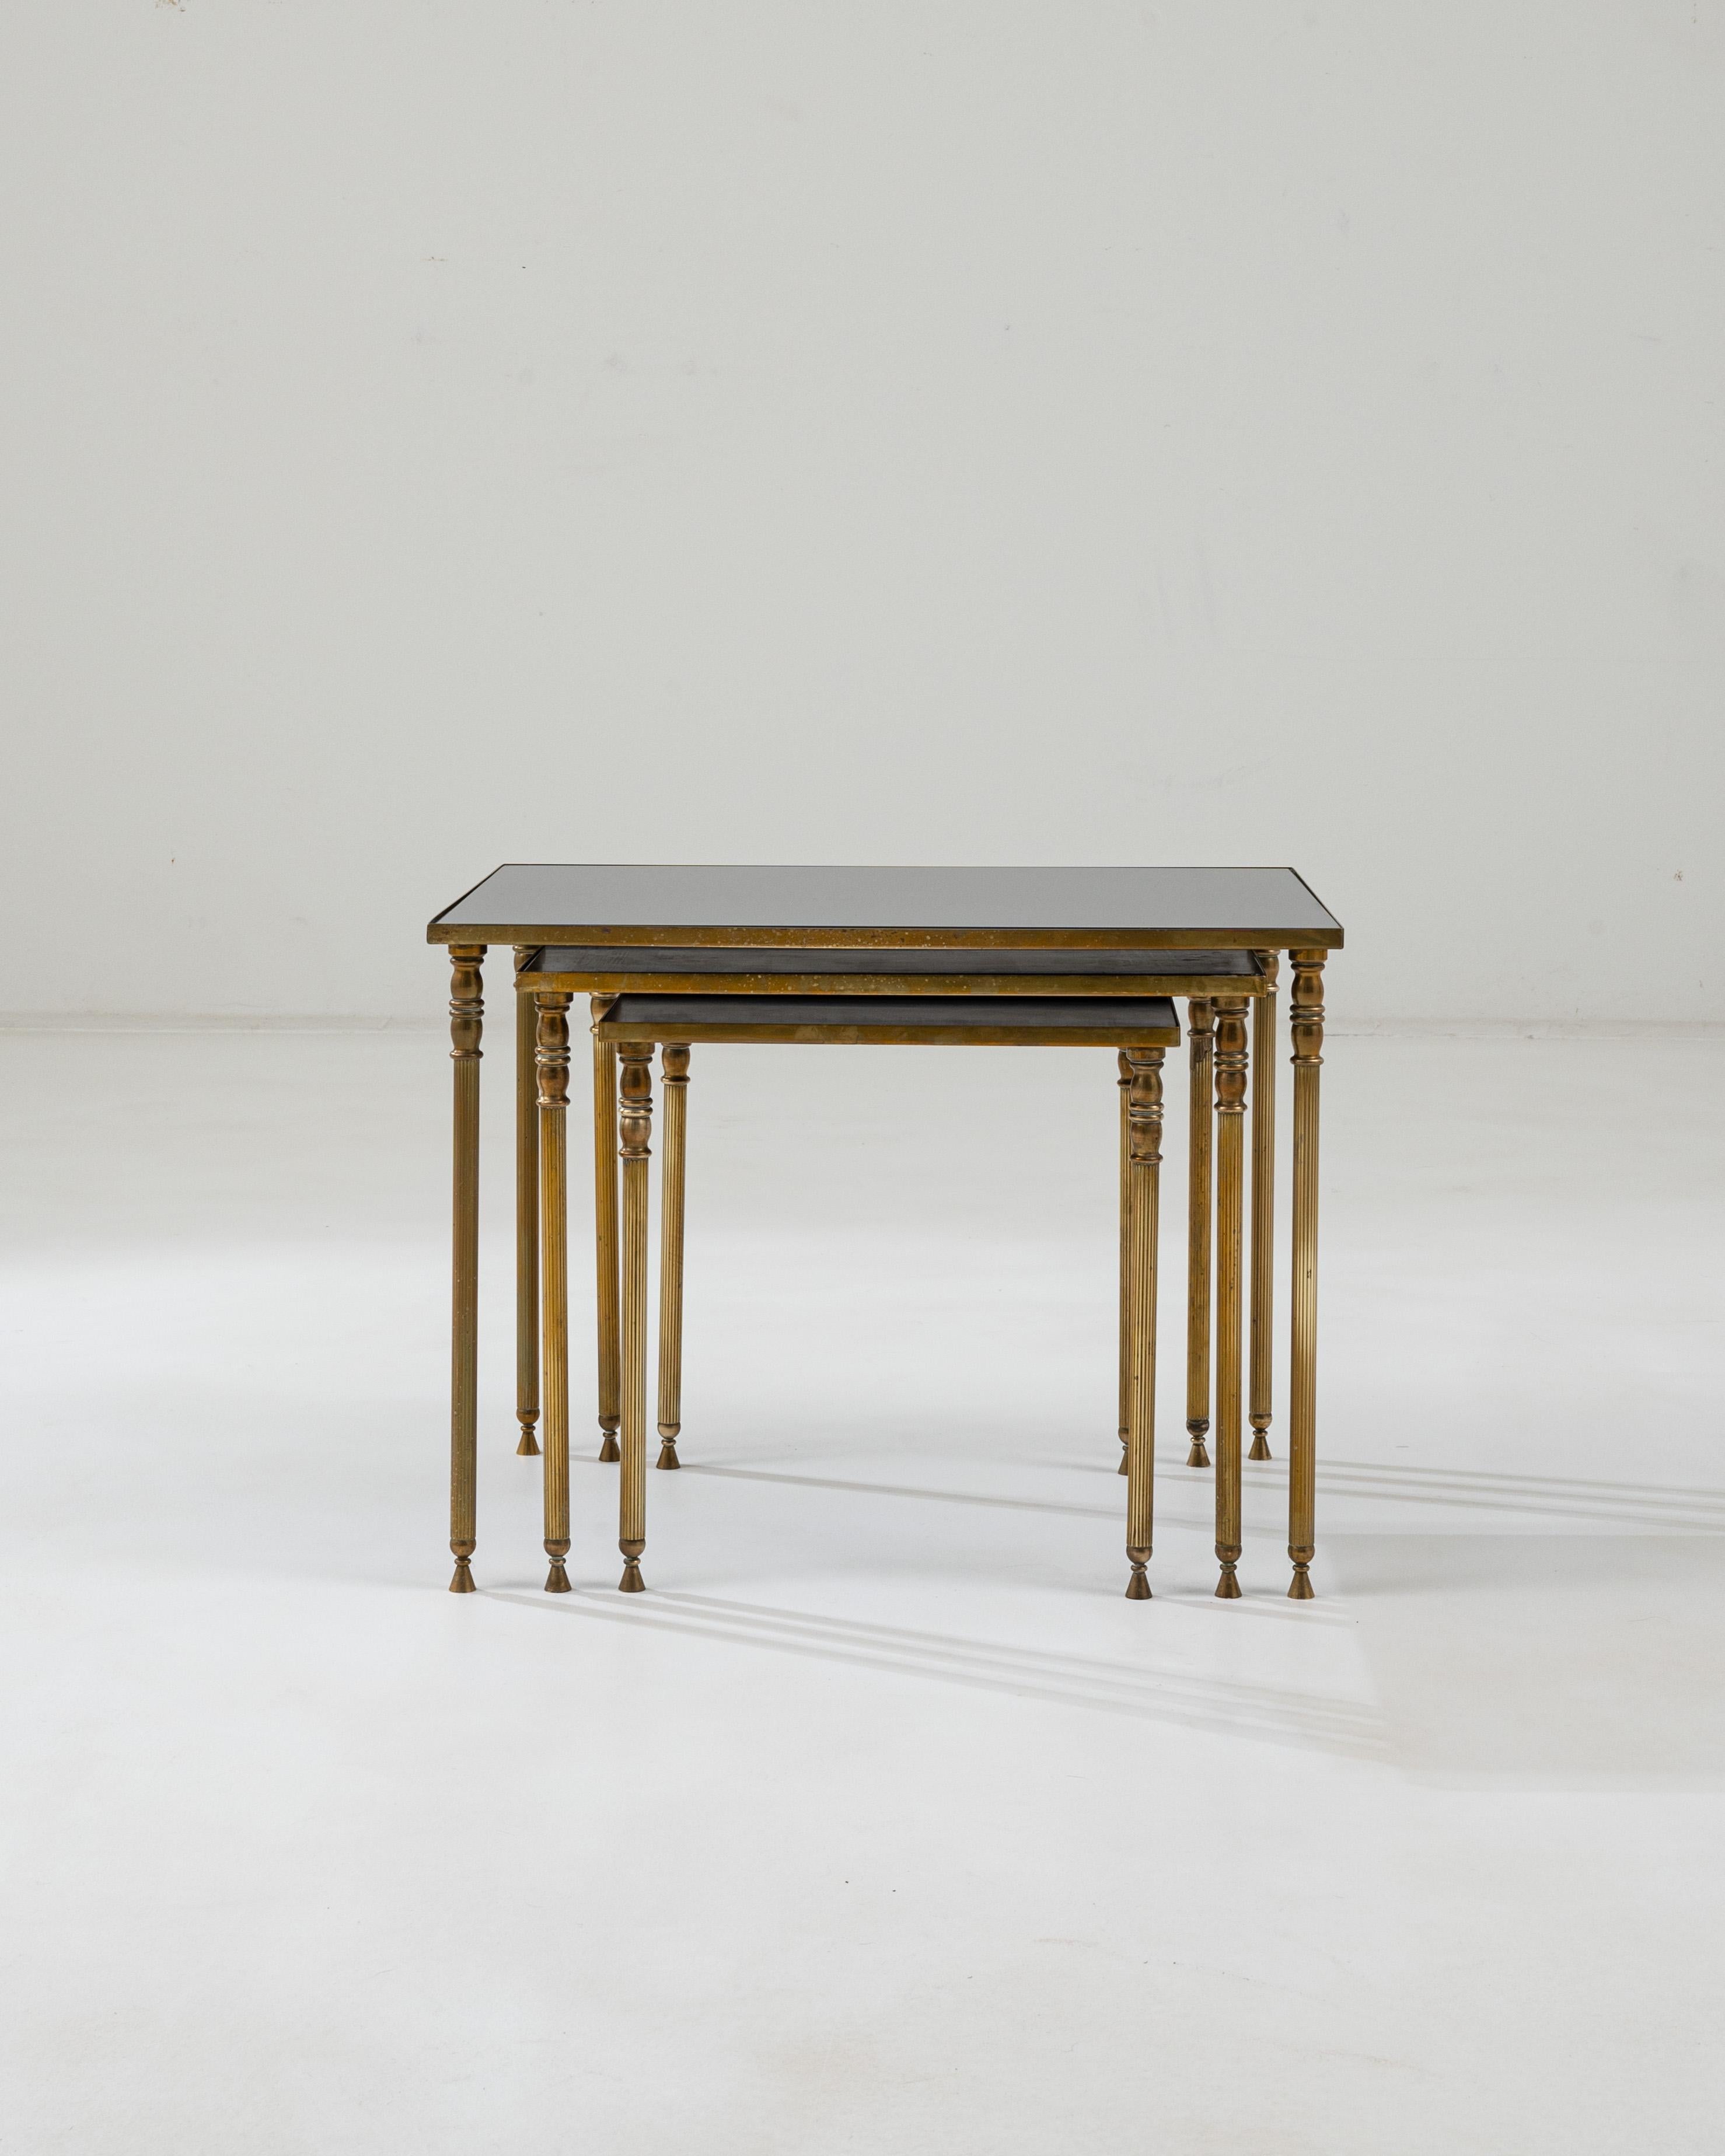 Neoclassical Revival 20th Century French Brass and Glass Nesting Tables, Set of Three For Sale